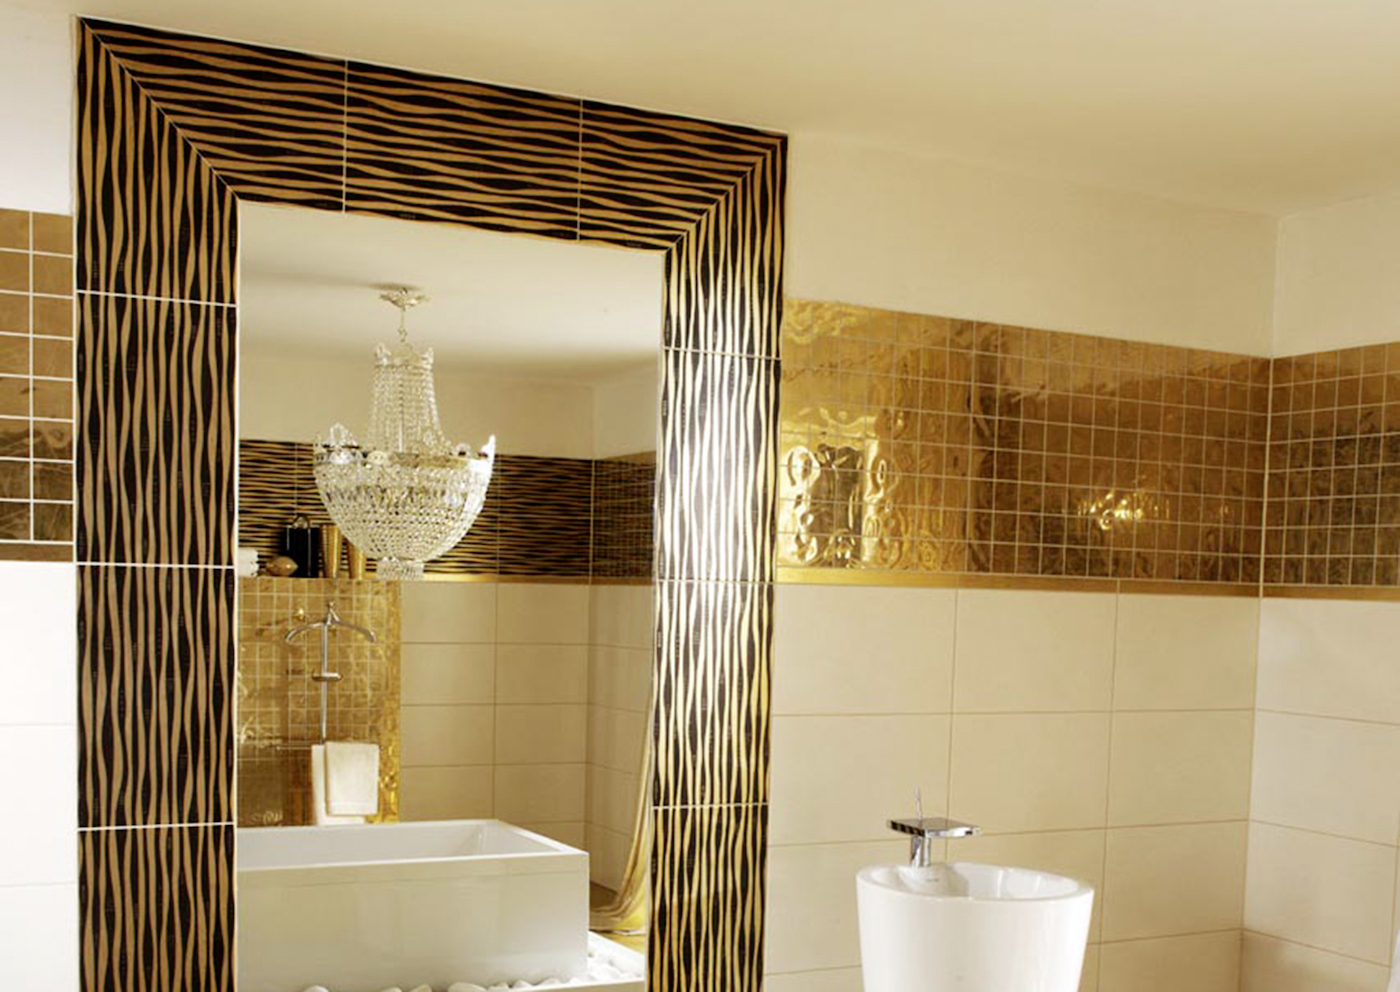 Gold Tiles realgold 7.2x7.2 Steingut, 7mm